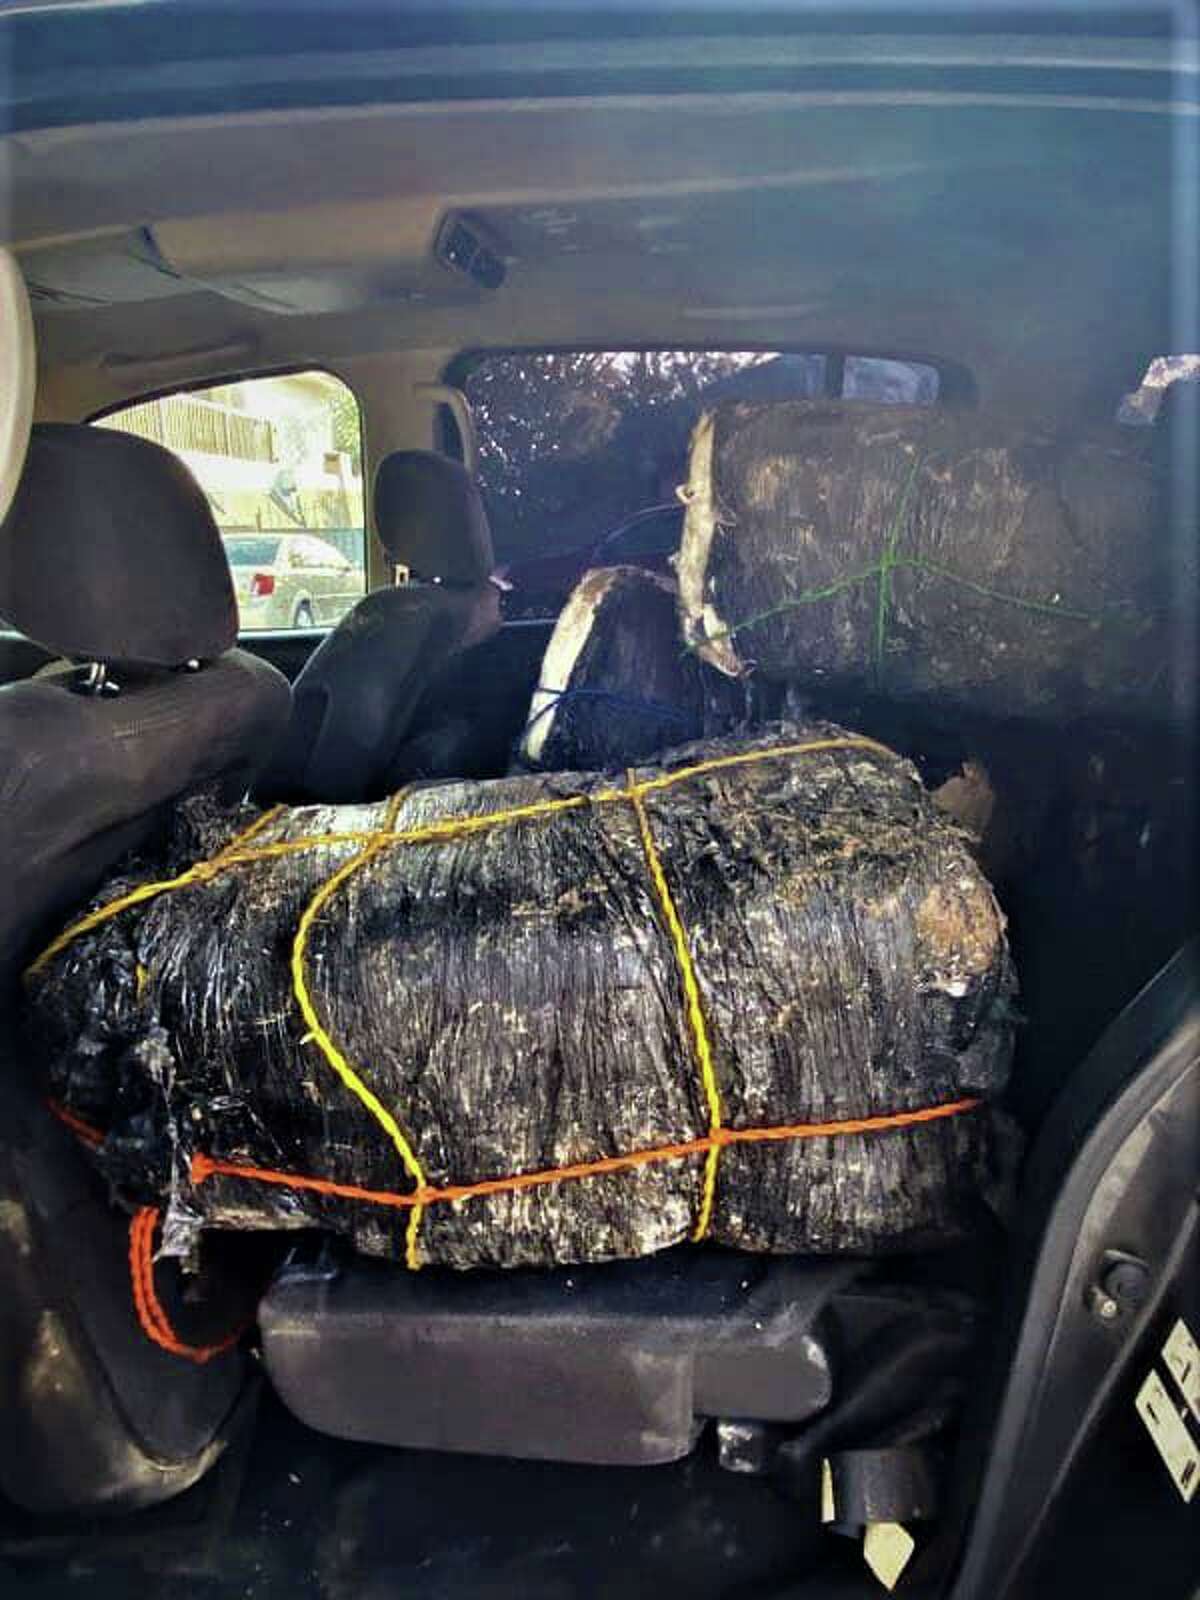 U.S. Border Patrol said this vehicle loaded with approximately $381,000 in marijuana was abandoned in the parking lot of Father McNaboe Park. The contraband weighed 477.3 pounds.